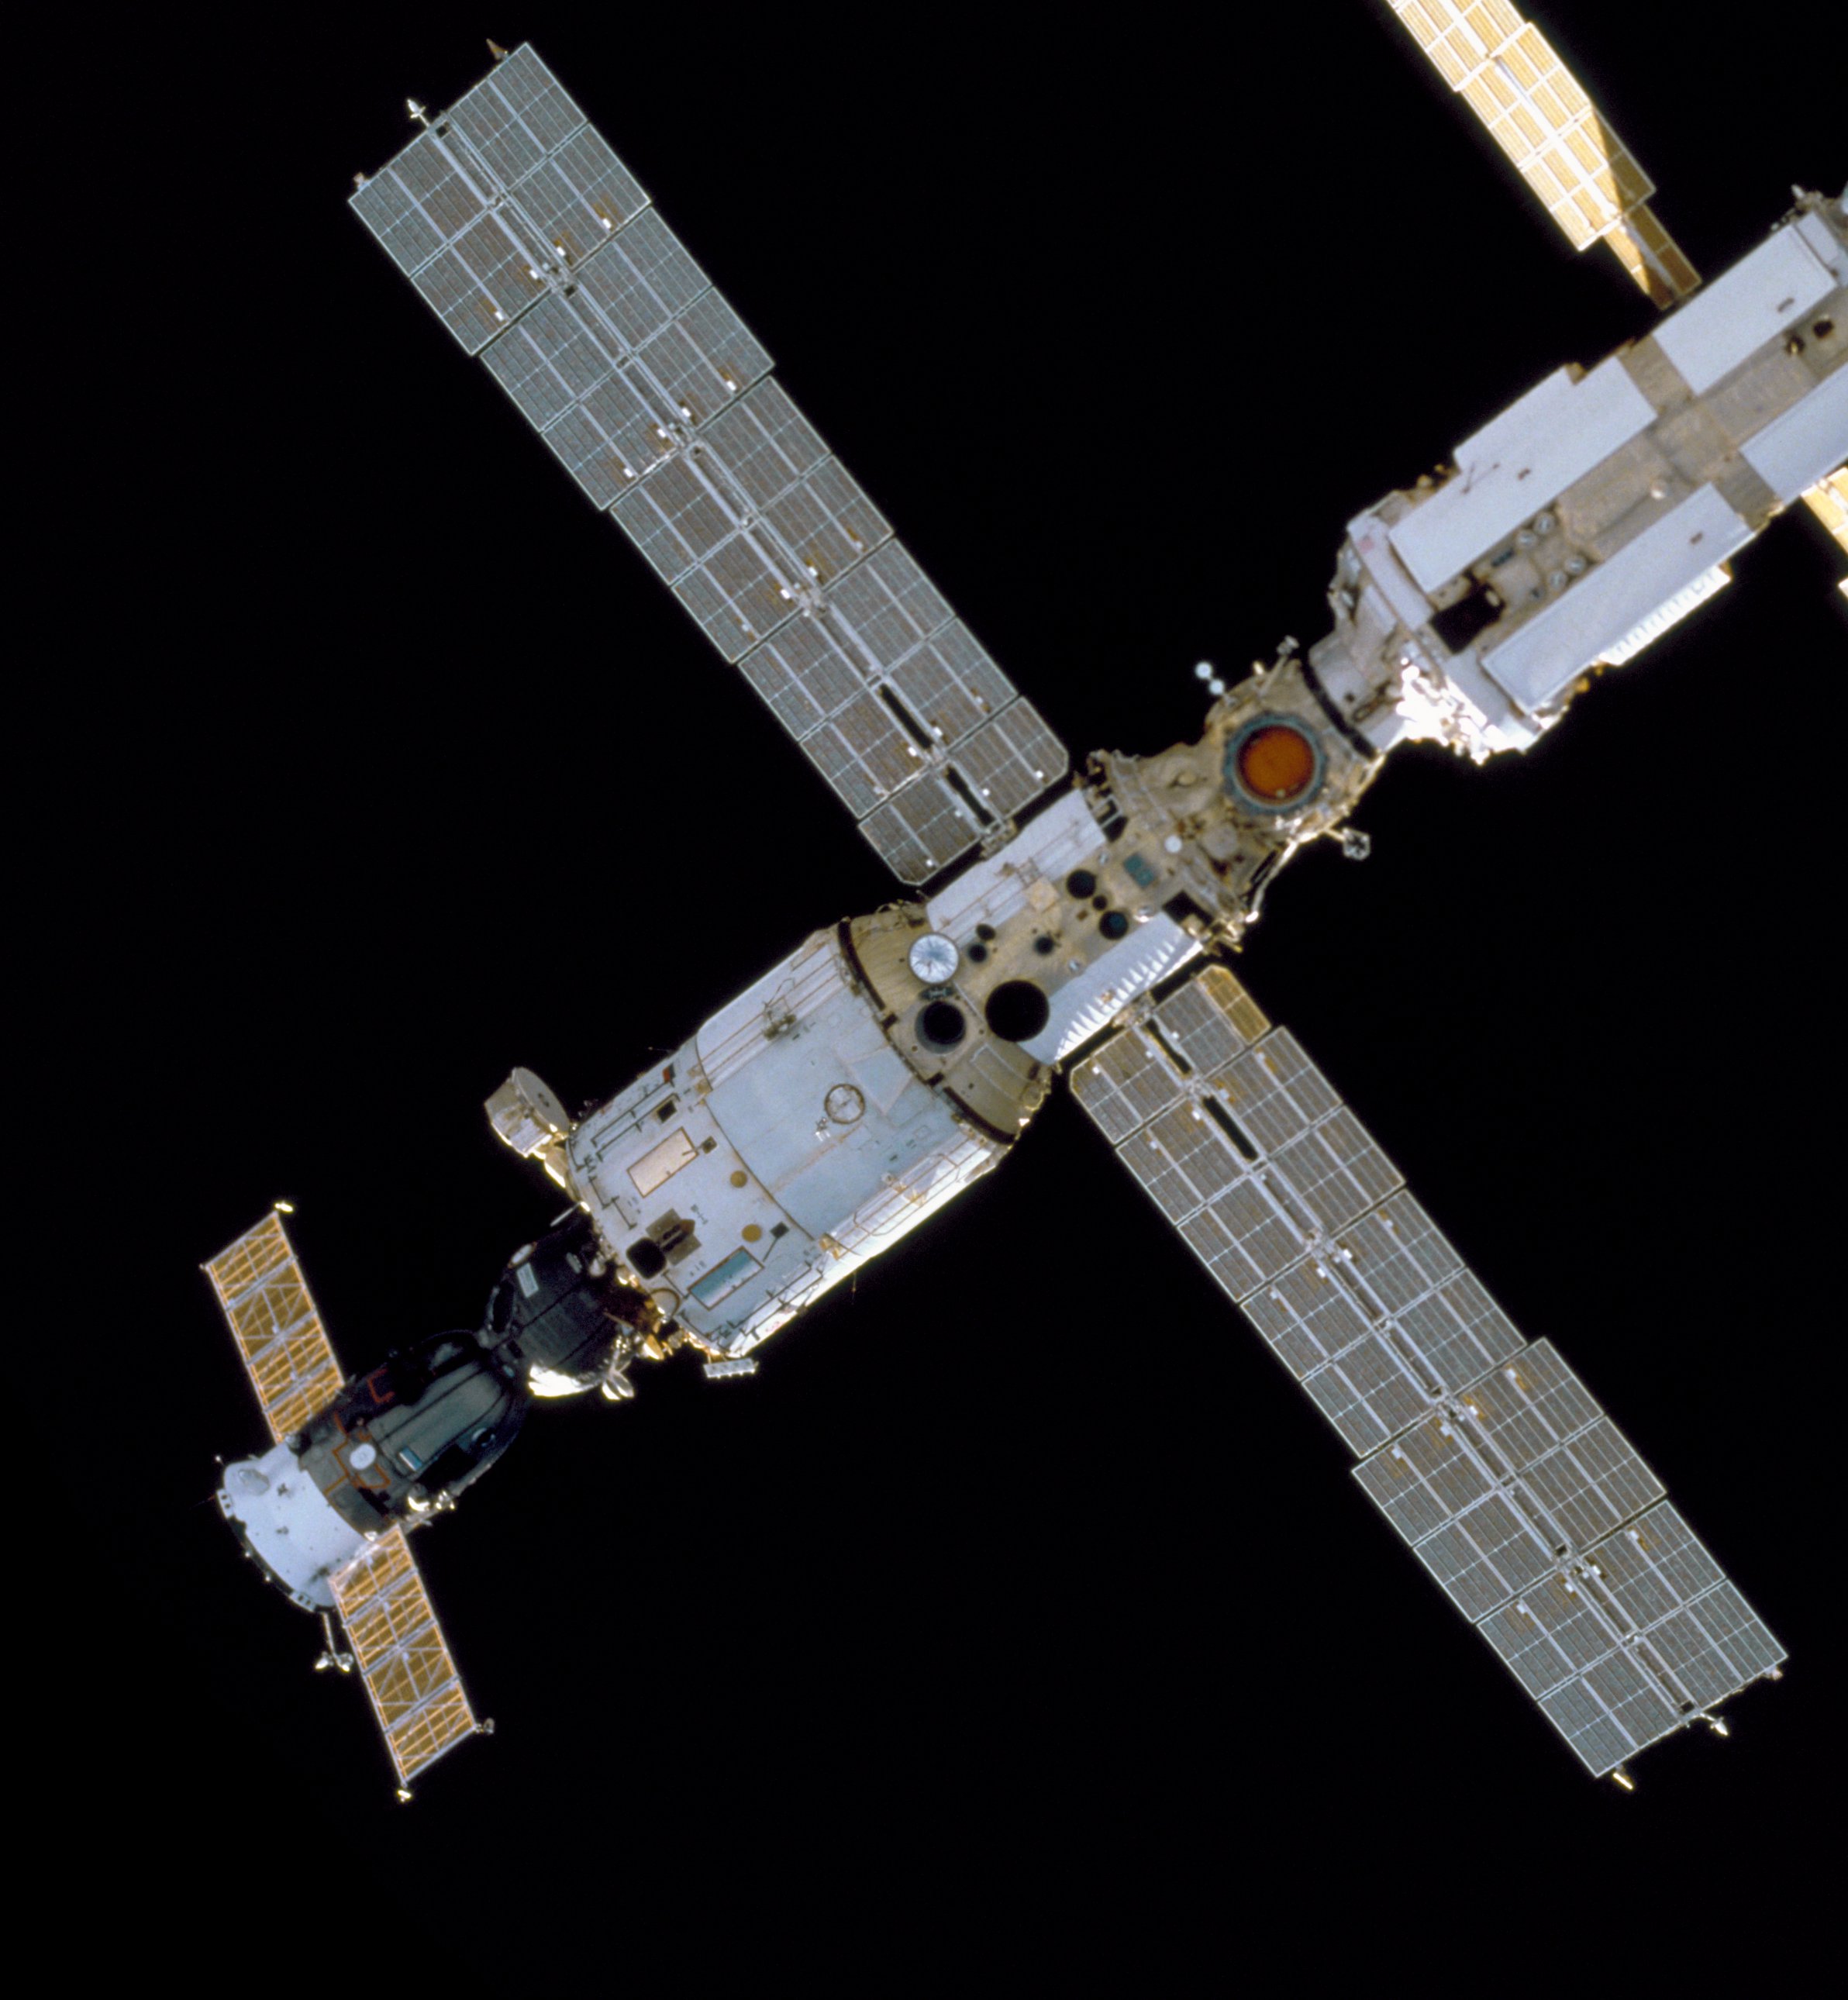 The Zvezda module, at the far bottom left in this photo, is one of six Russian segments of the ISS and houses the engines used to keep the station in orbit.